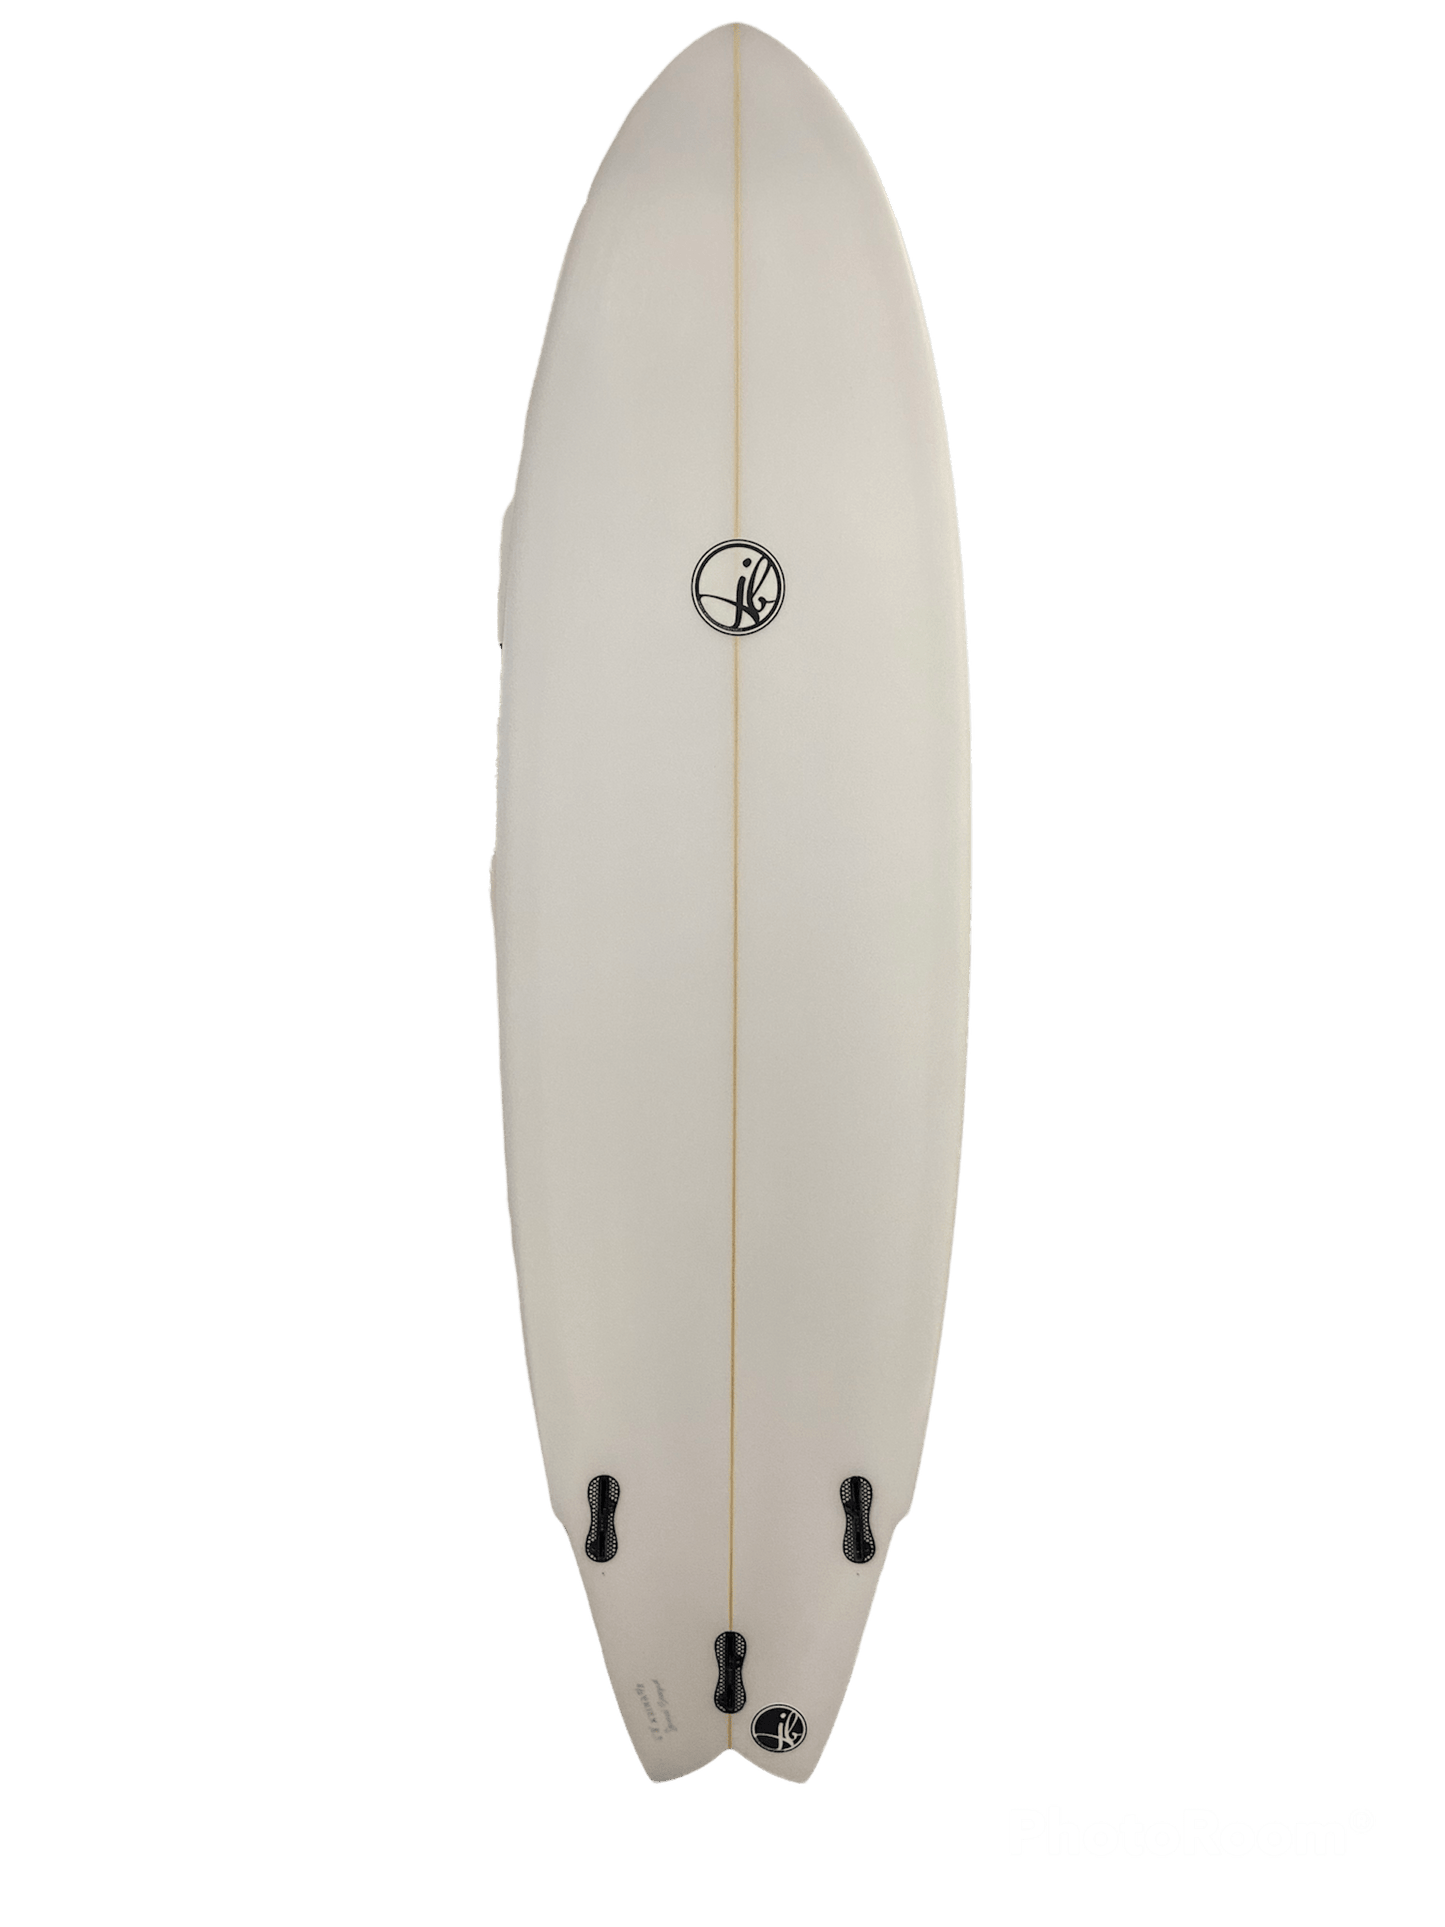 6'8 Muzzy Stingfish Wing Swallow Tail Surfboard Surfboards